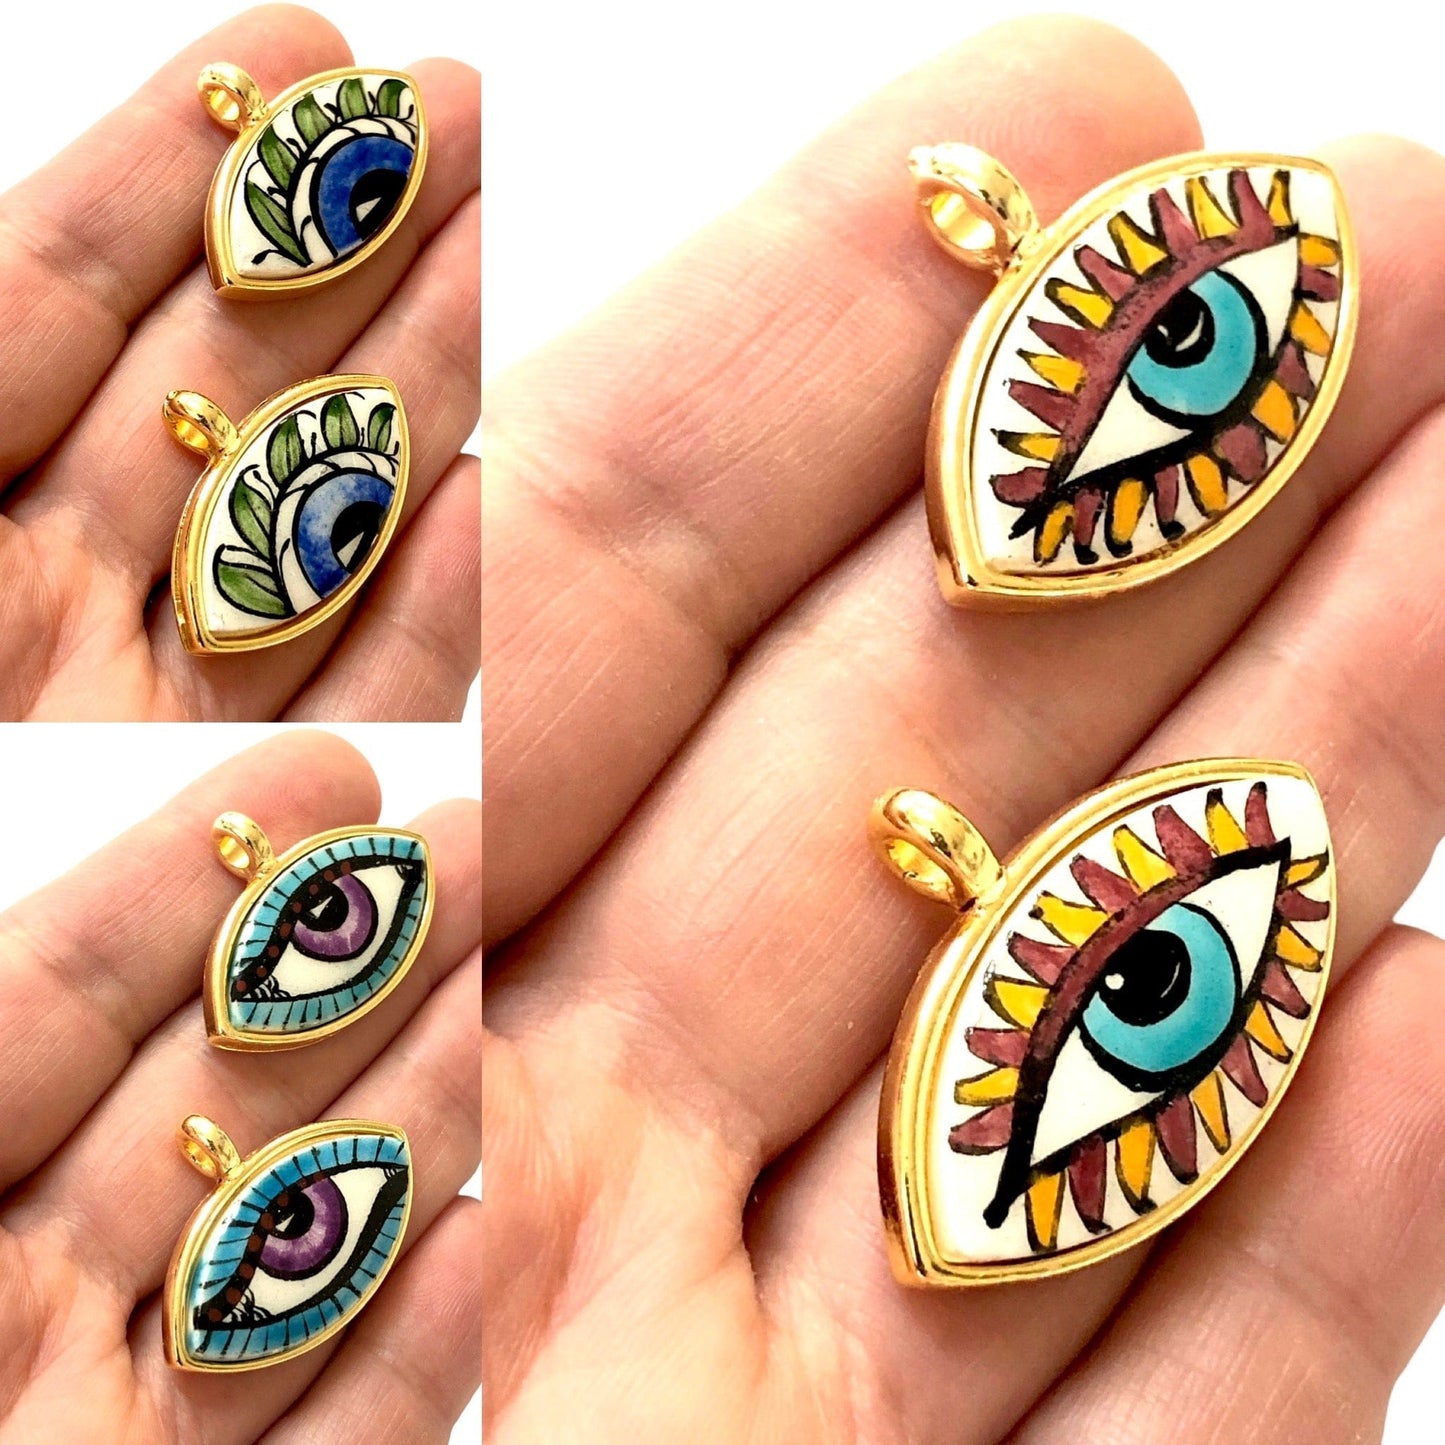 Large Gold Plated Framed Hand Painted Ceramic Eye Pendant-024